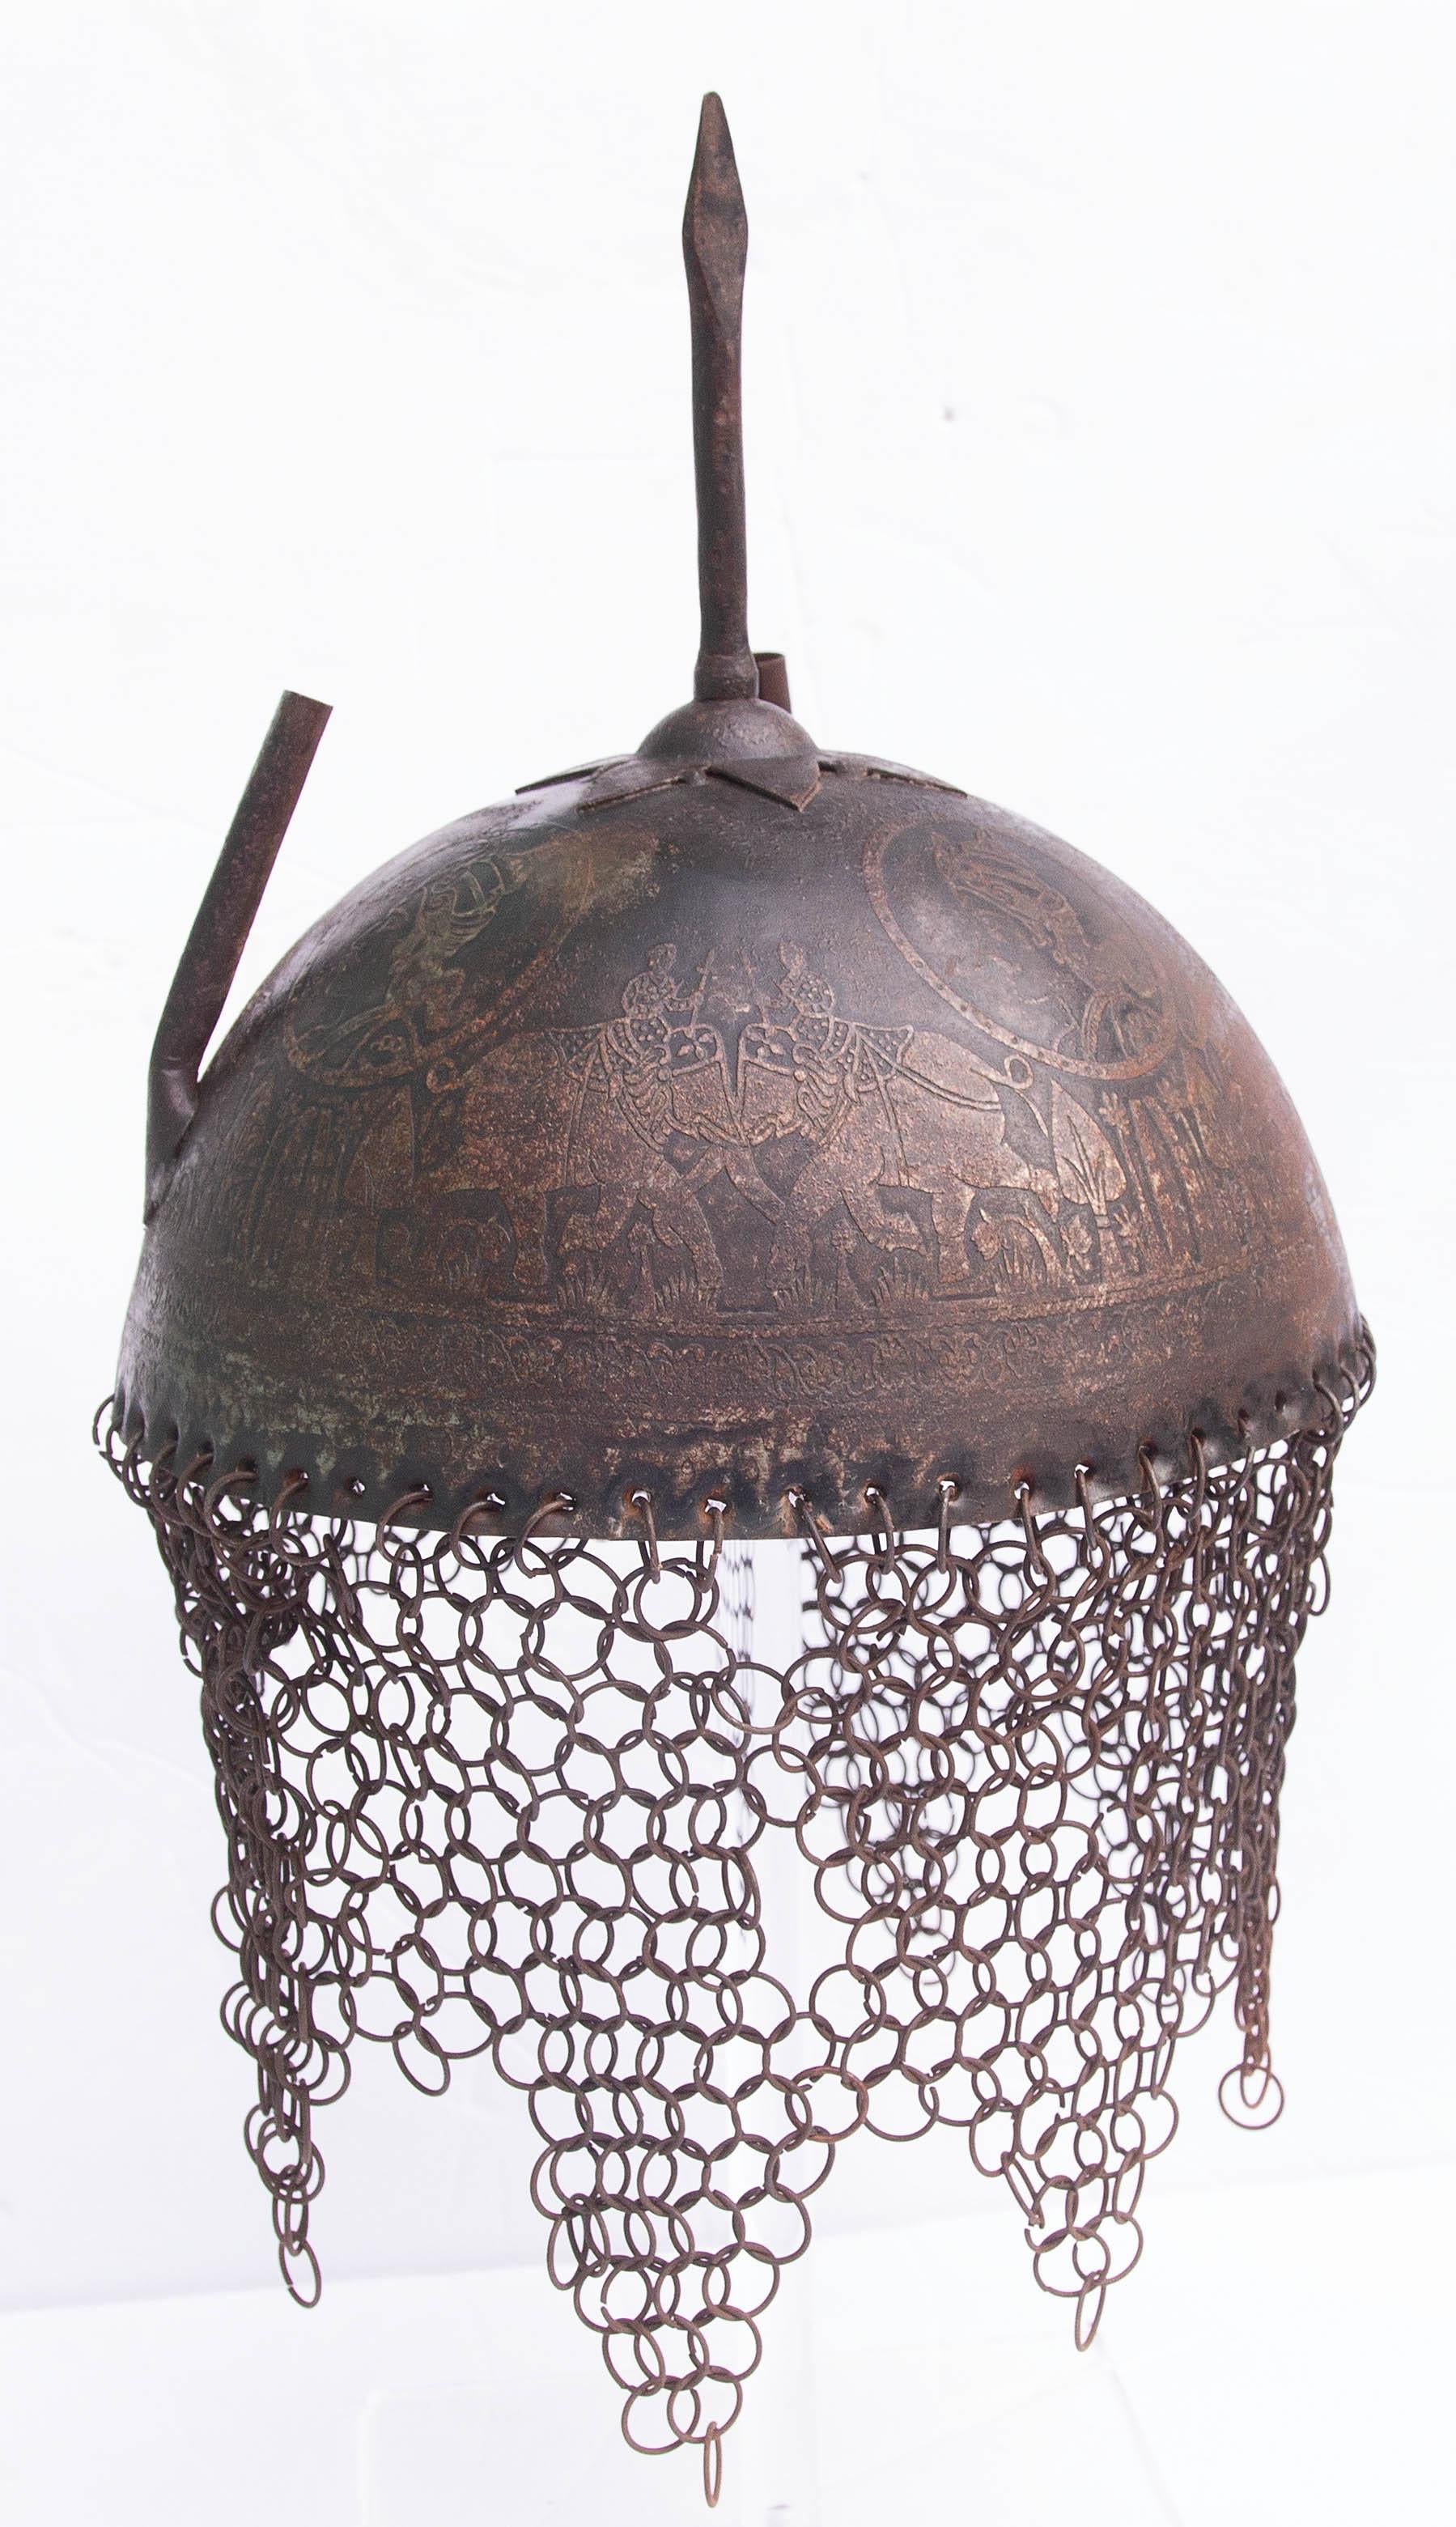 Islamic Persian iron helmet with chainmail. Engraved with elephants and an Arab warrior. Early 20th century. Lucite display stand is included.